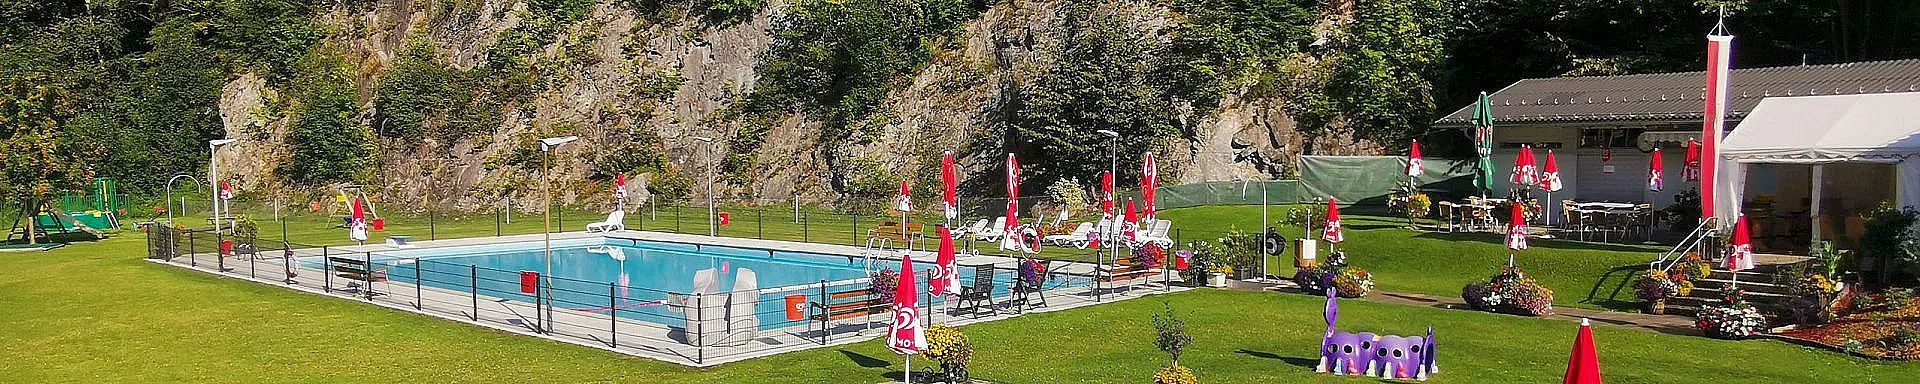 klostertal-sommer-schwimmbad-dalaas